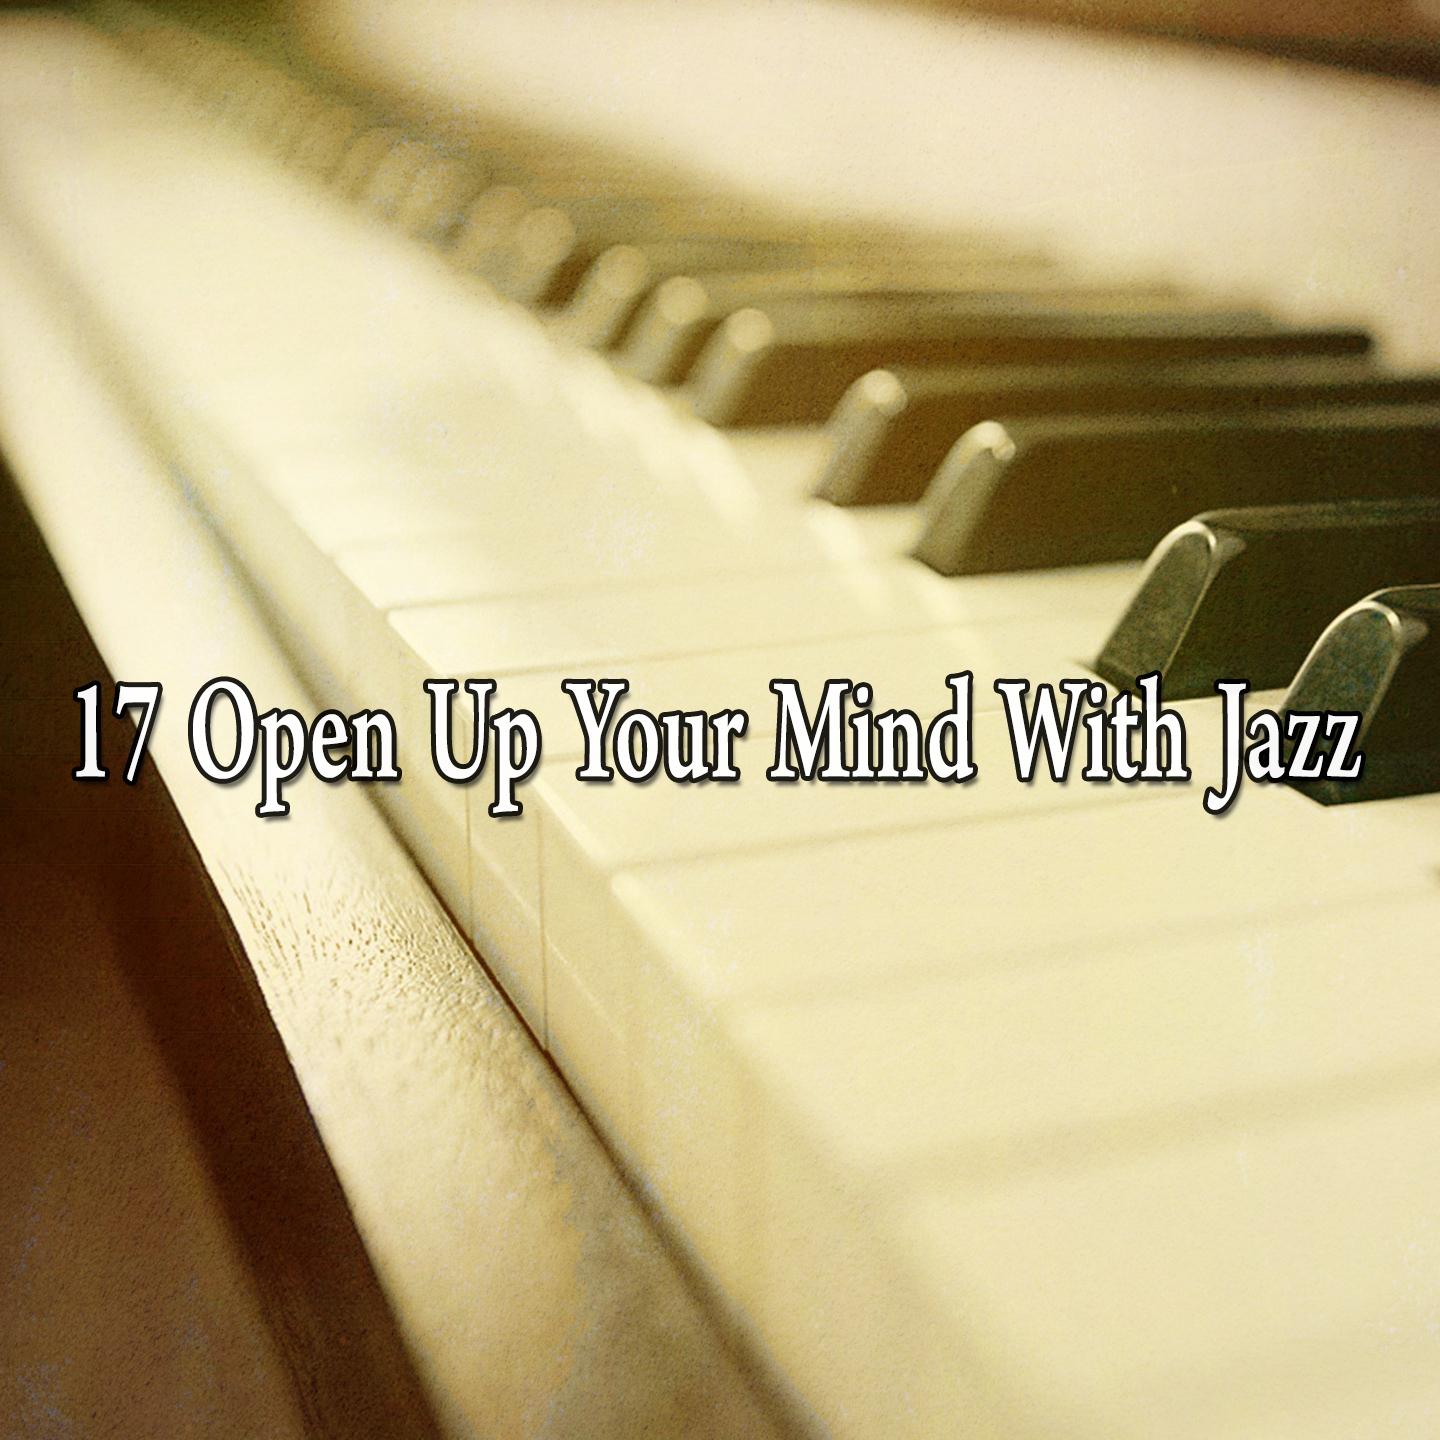 17 Open up Your Mind with Jazz